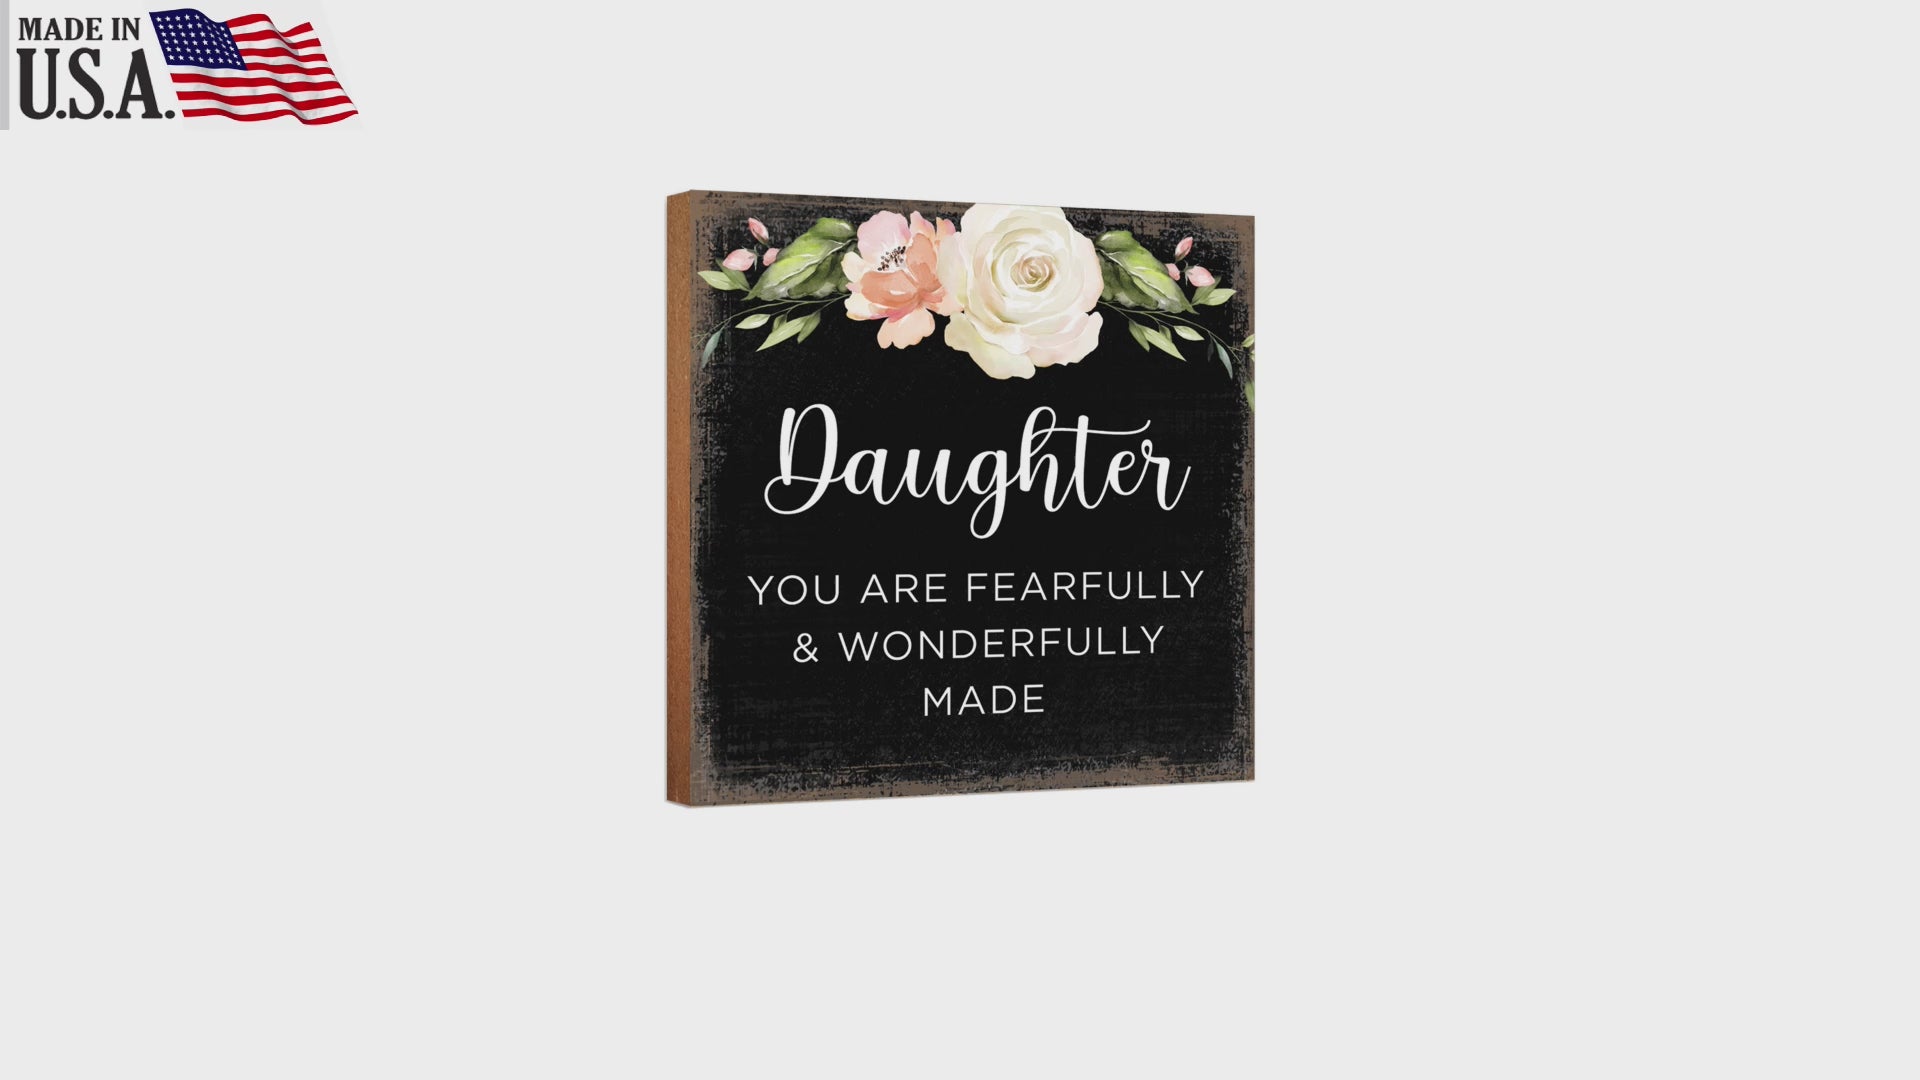 LifeSong Milestones Unique Wooden Shelf Decor and Tabletop Signs - Ideal Mother's Day Gift for Daughter